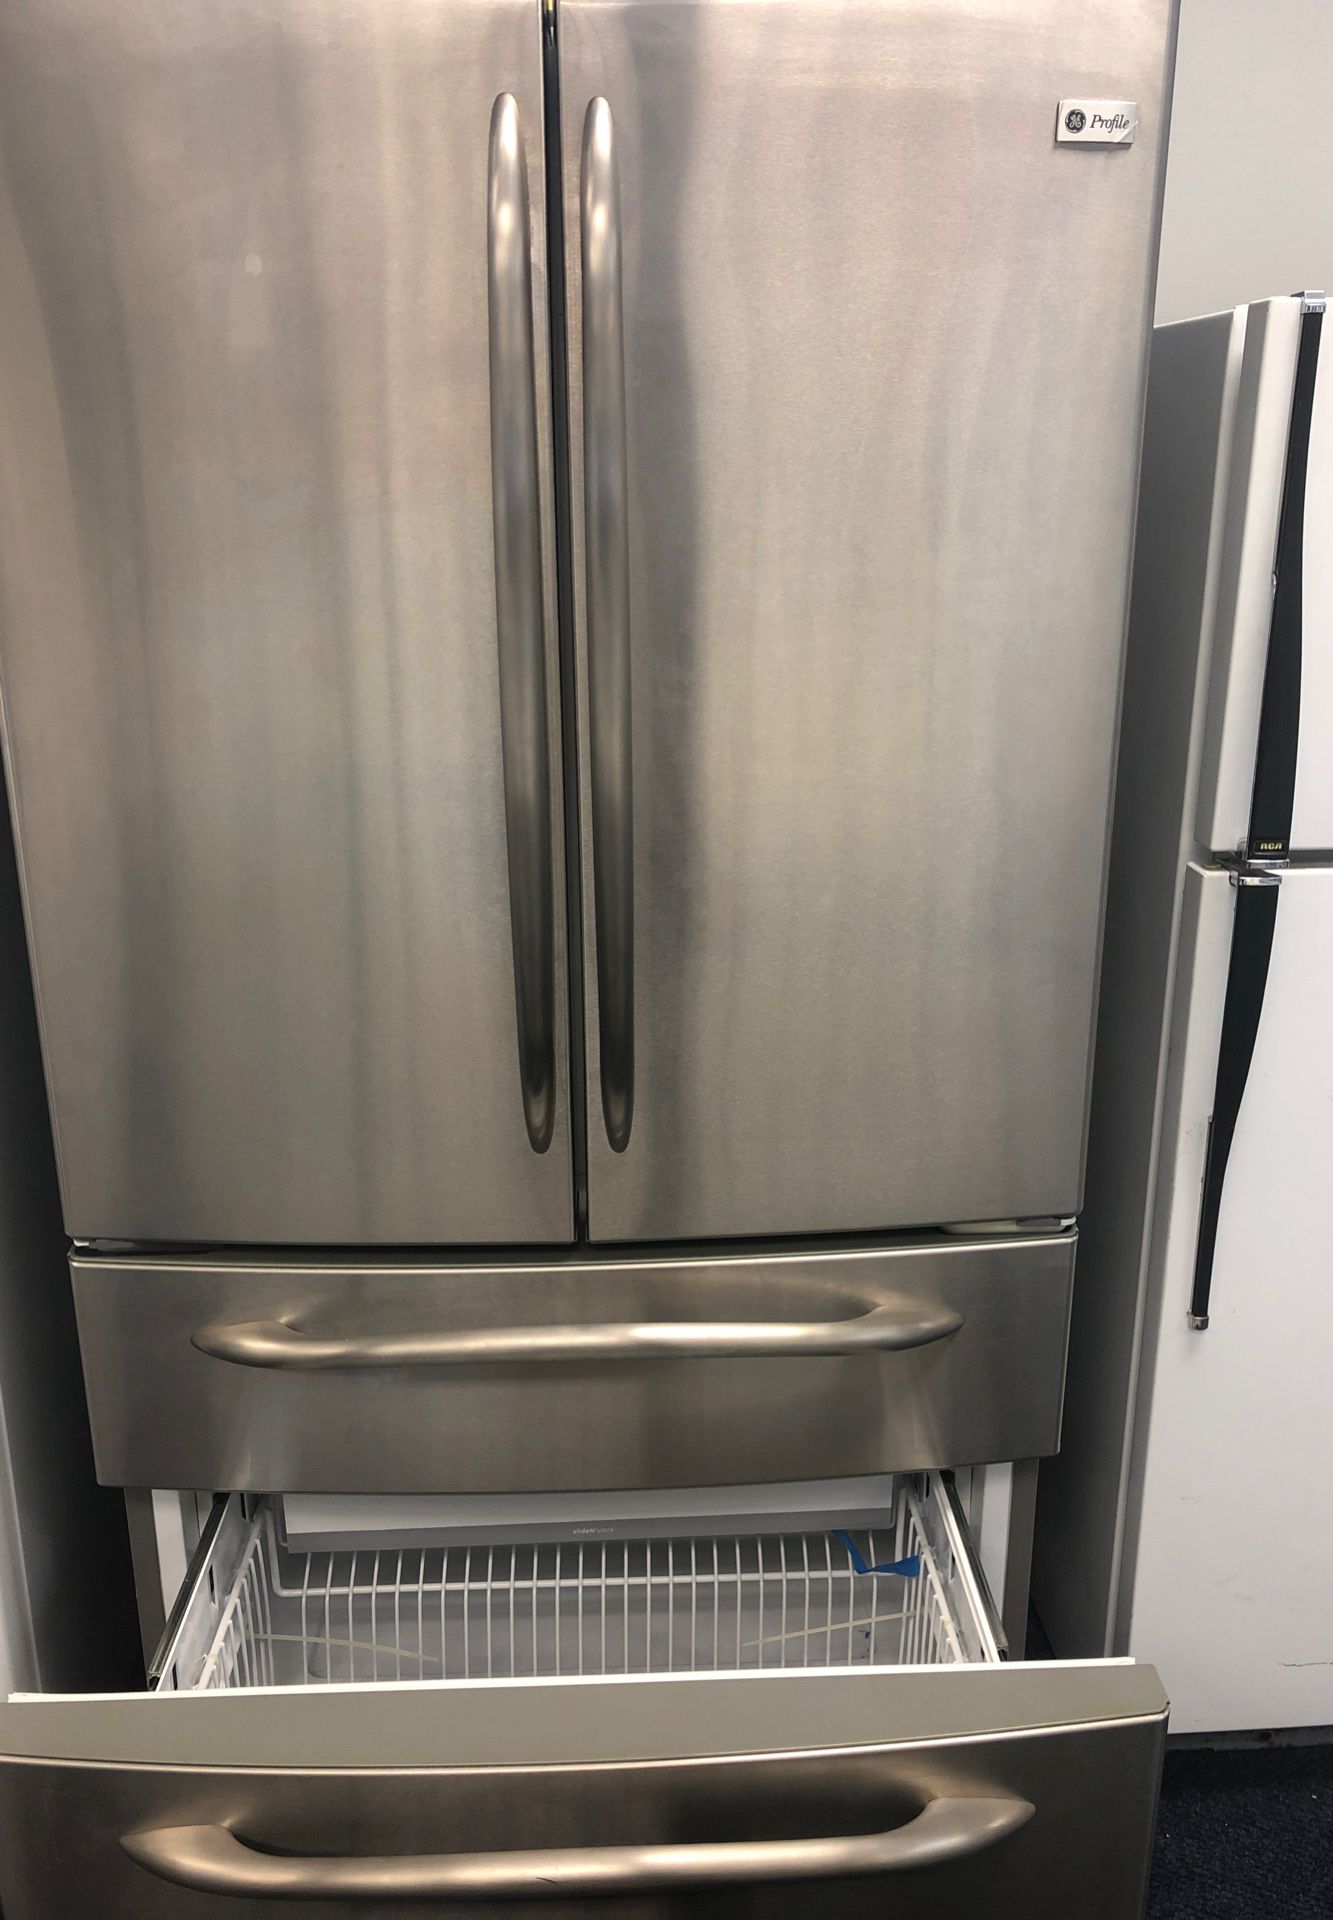 Brand new out of box GE profile French door refrigerator.